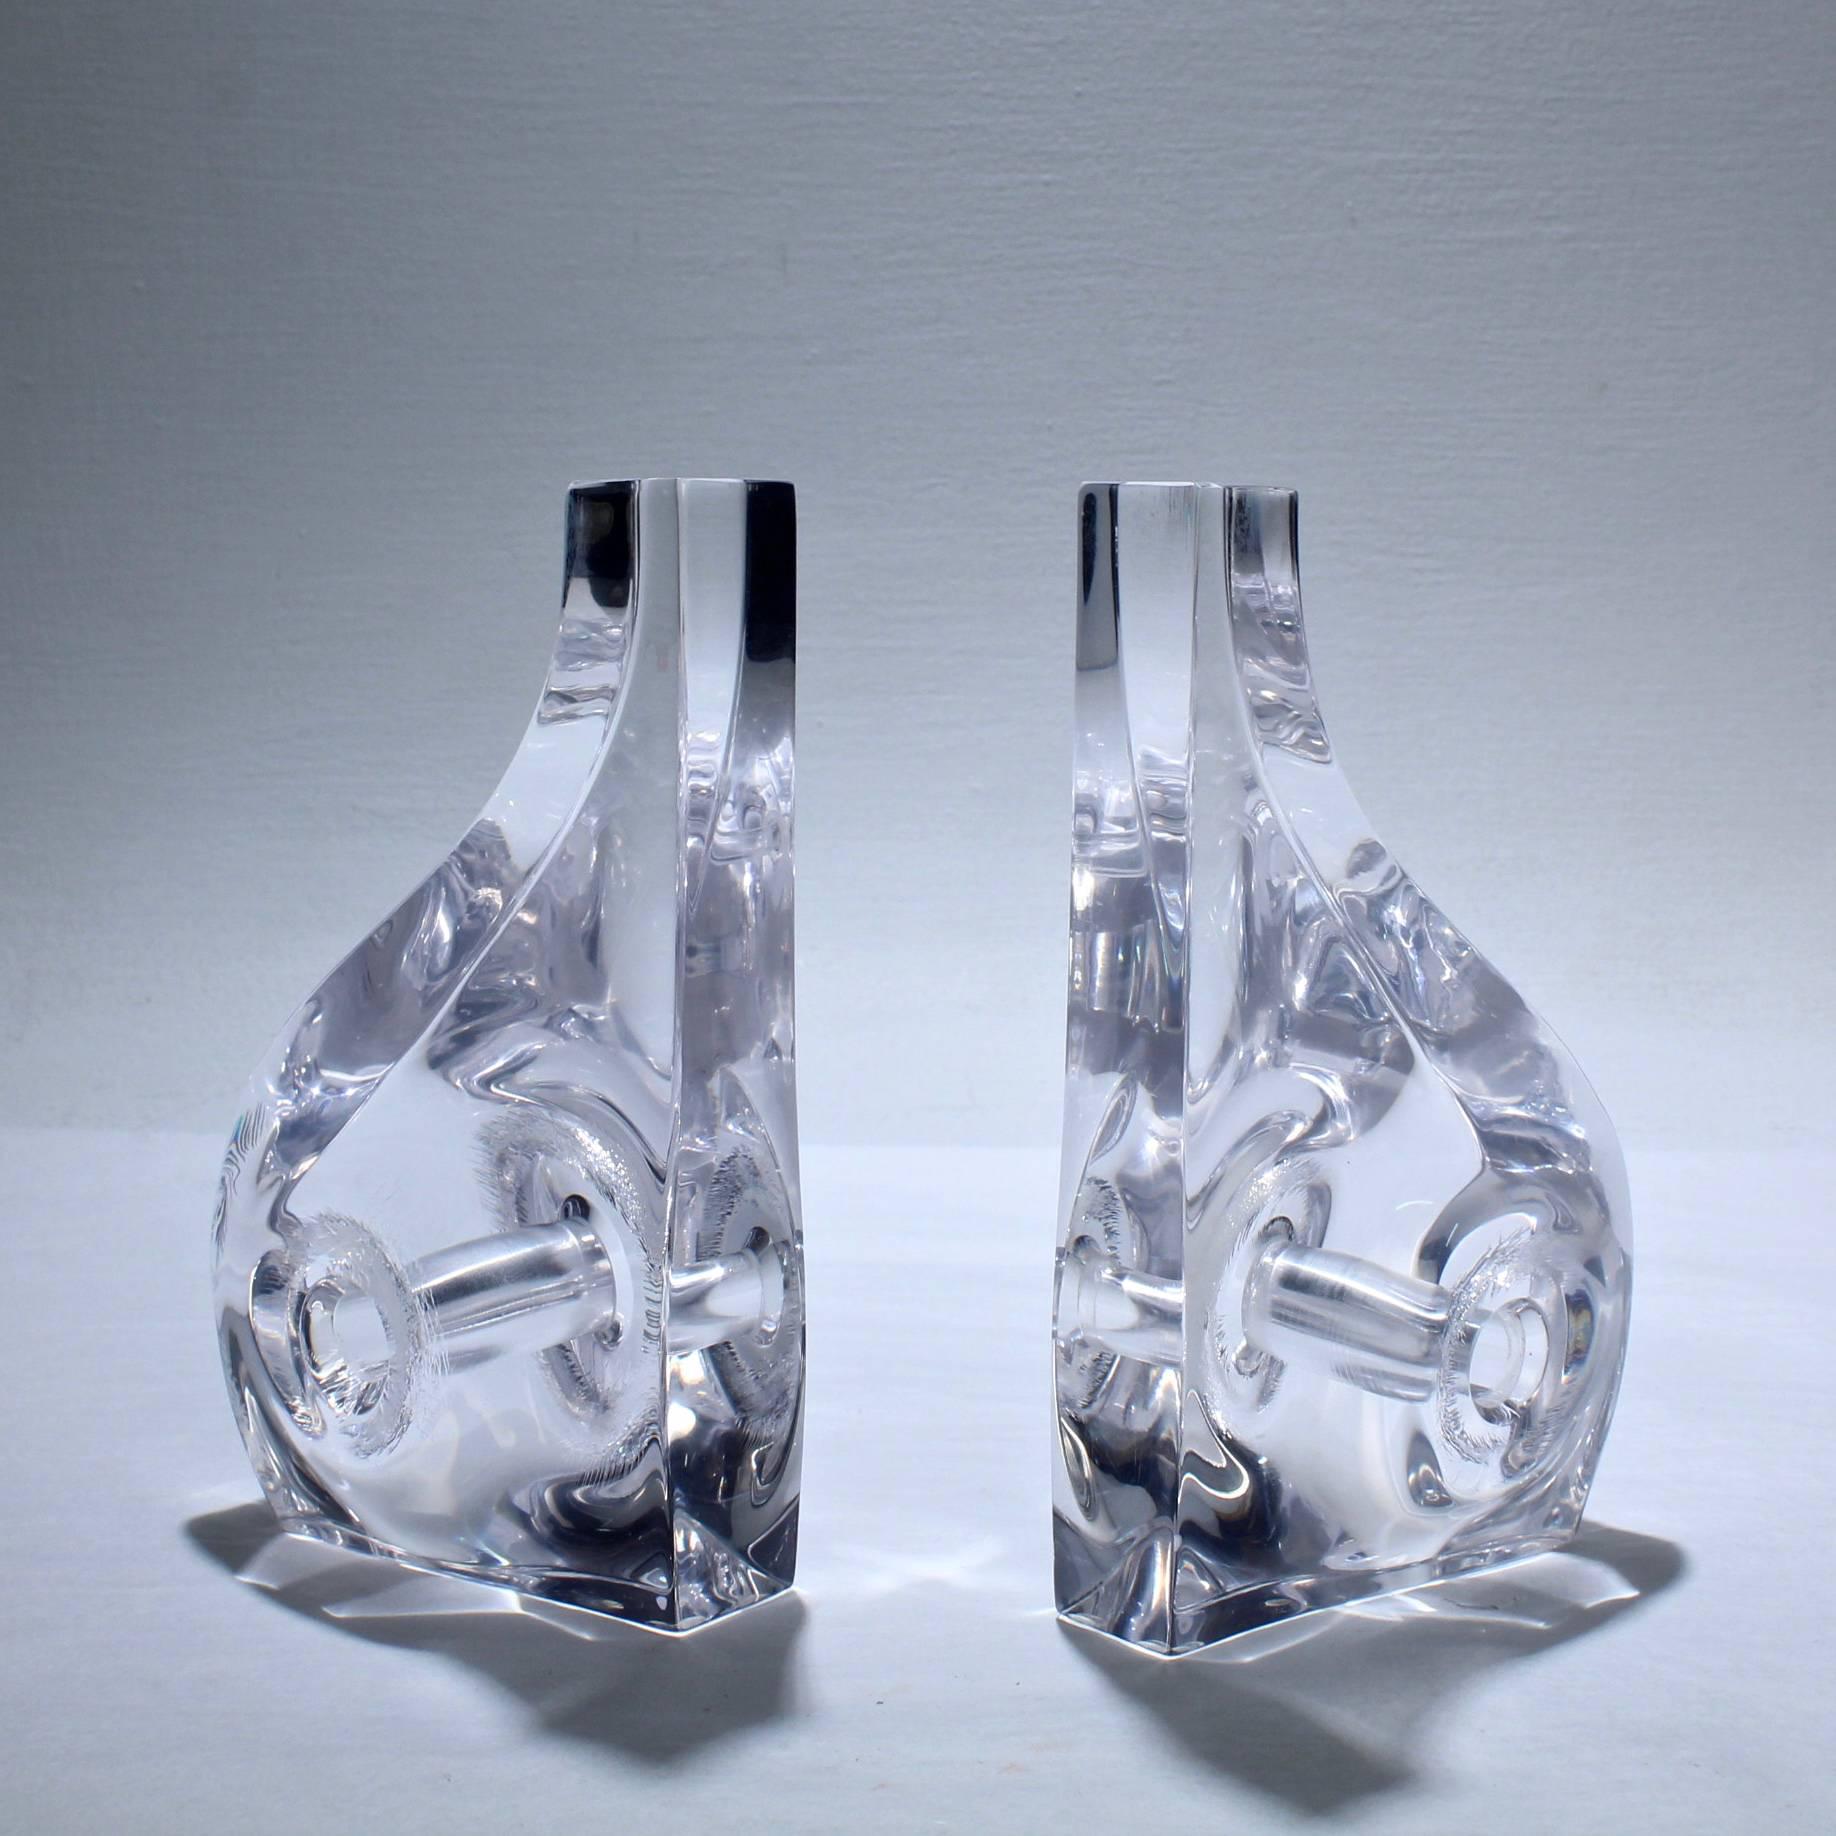 Pair of Ritts Astrolite Modern Abstract Lucite Bookends In Good Condition For Sale In Philadelphia, PA